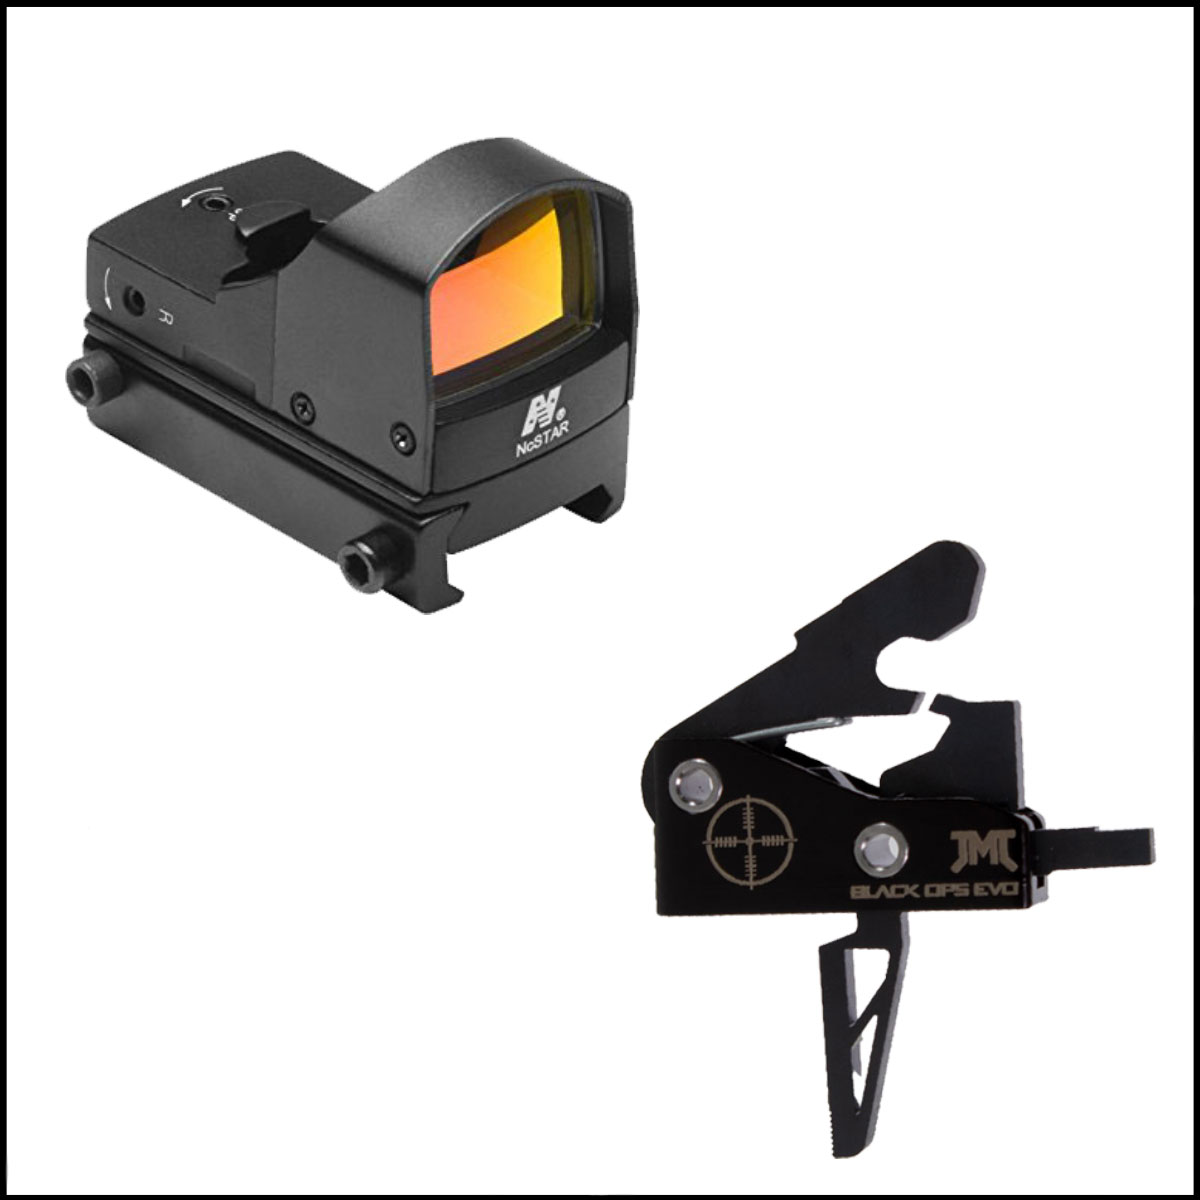 RDS Combo: DDAB Tactical Red Dot Mini Reflex Sight + James Madison Tactical Drop-In Trigger - Special Buy